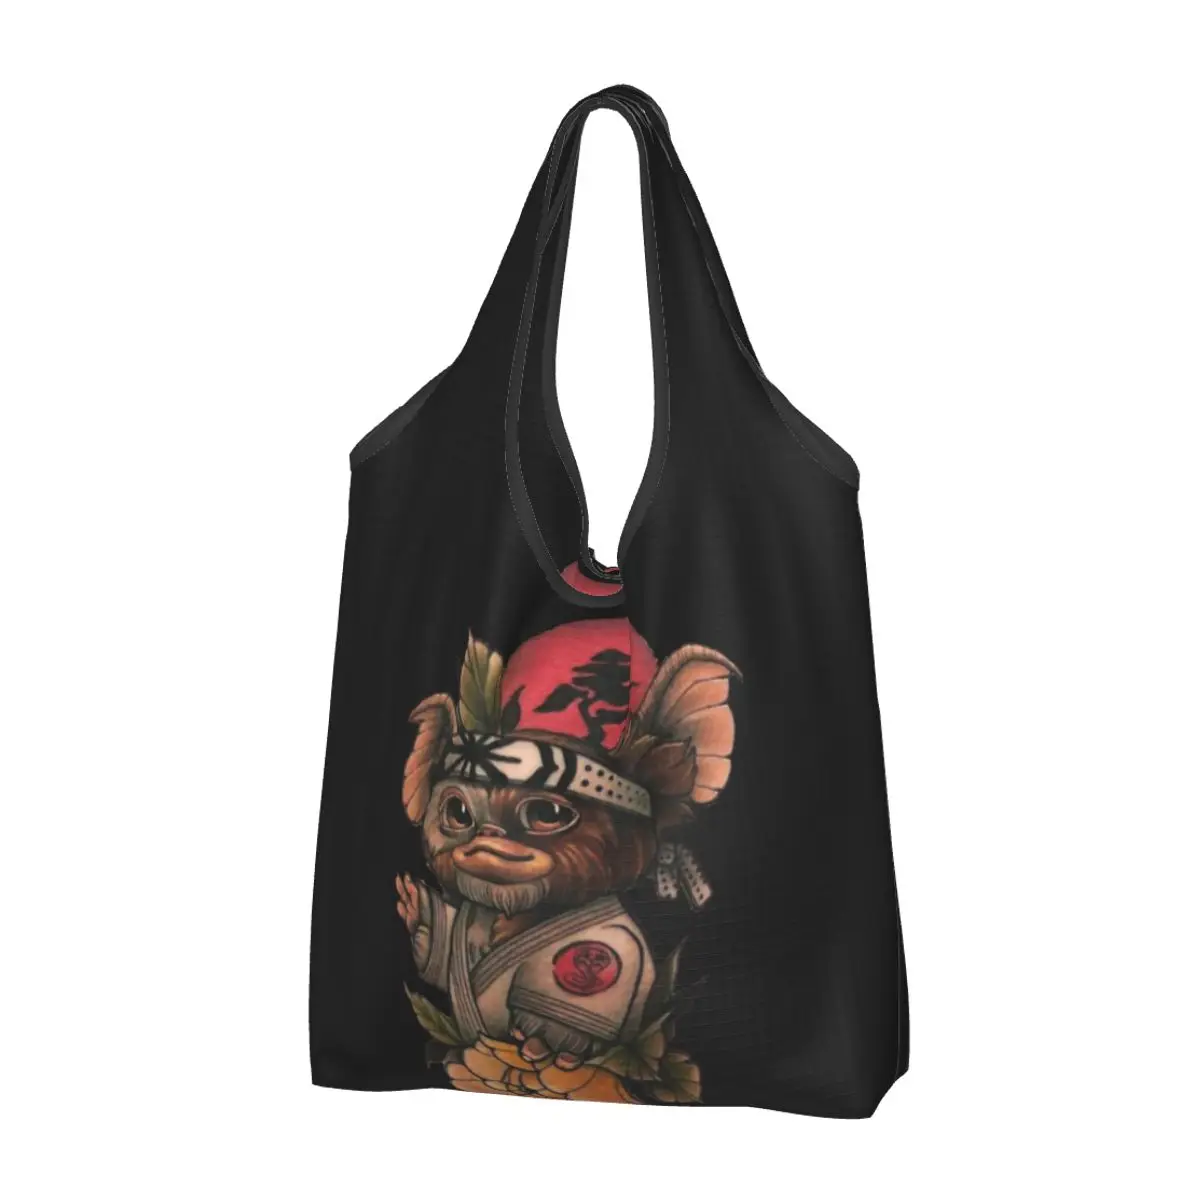 

Reusable Gizmo Gremlins Shopping Bags for Groceries Foldable Mogwai Monster Horror Retro Sci Fi Grocery Washable Large Tote Bags